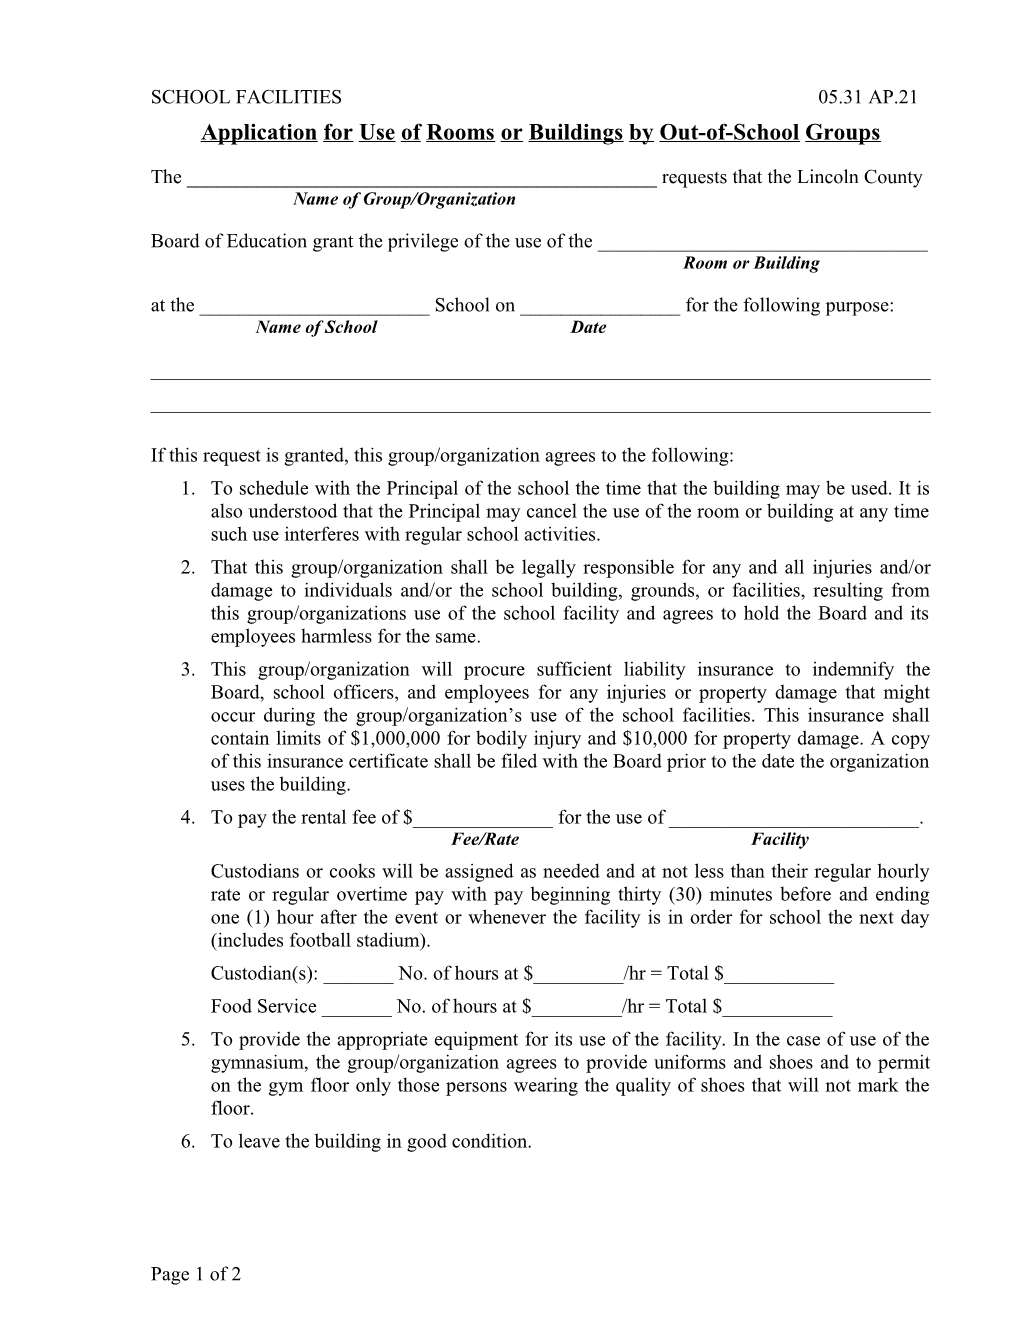 Application for Use of Rooms Or Buildings by Out-Of-School Groups